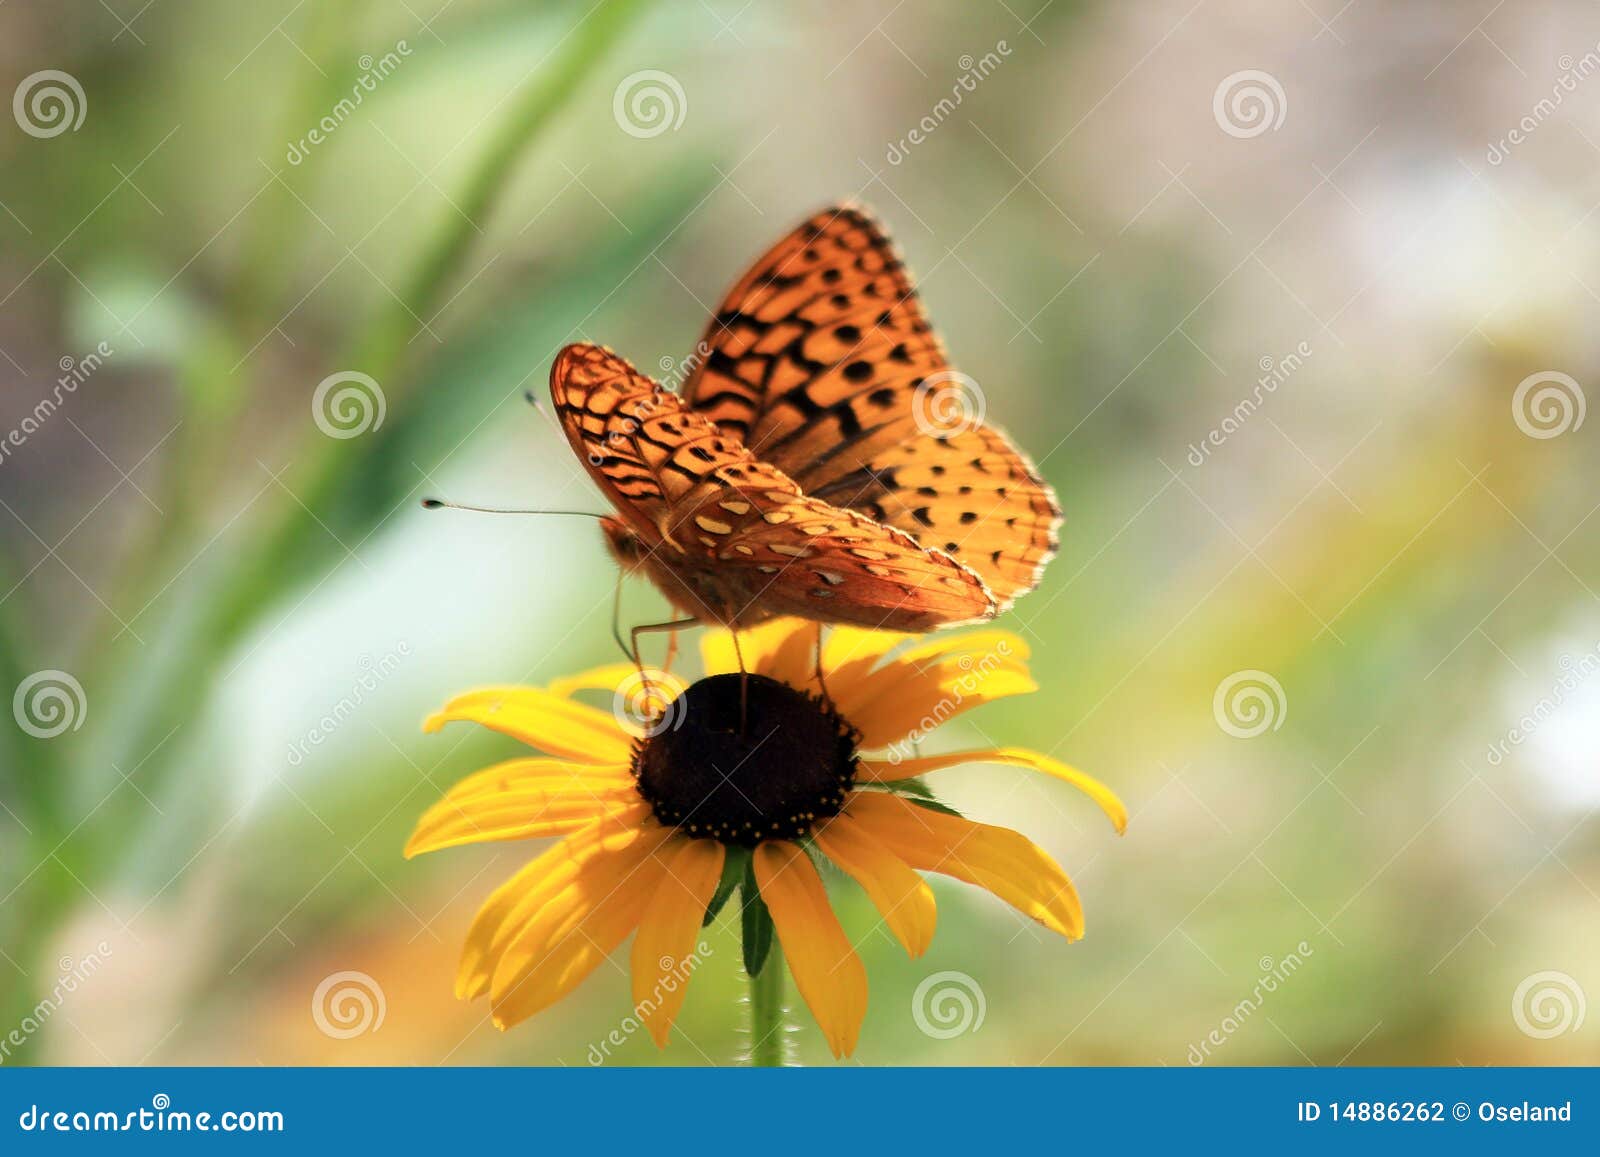 aphrodite fritillary butterfly